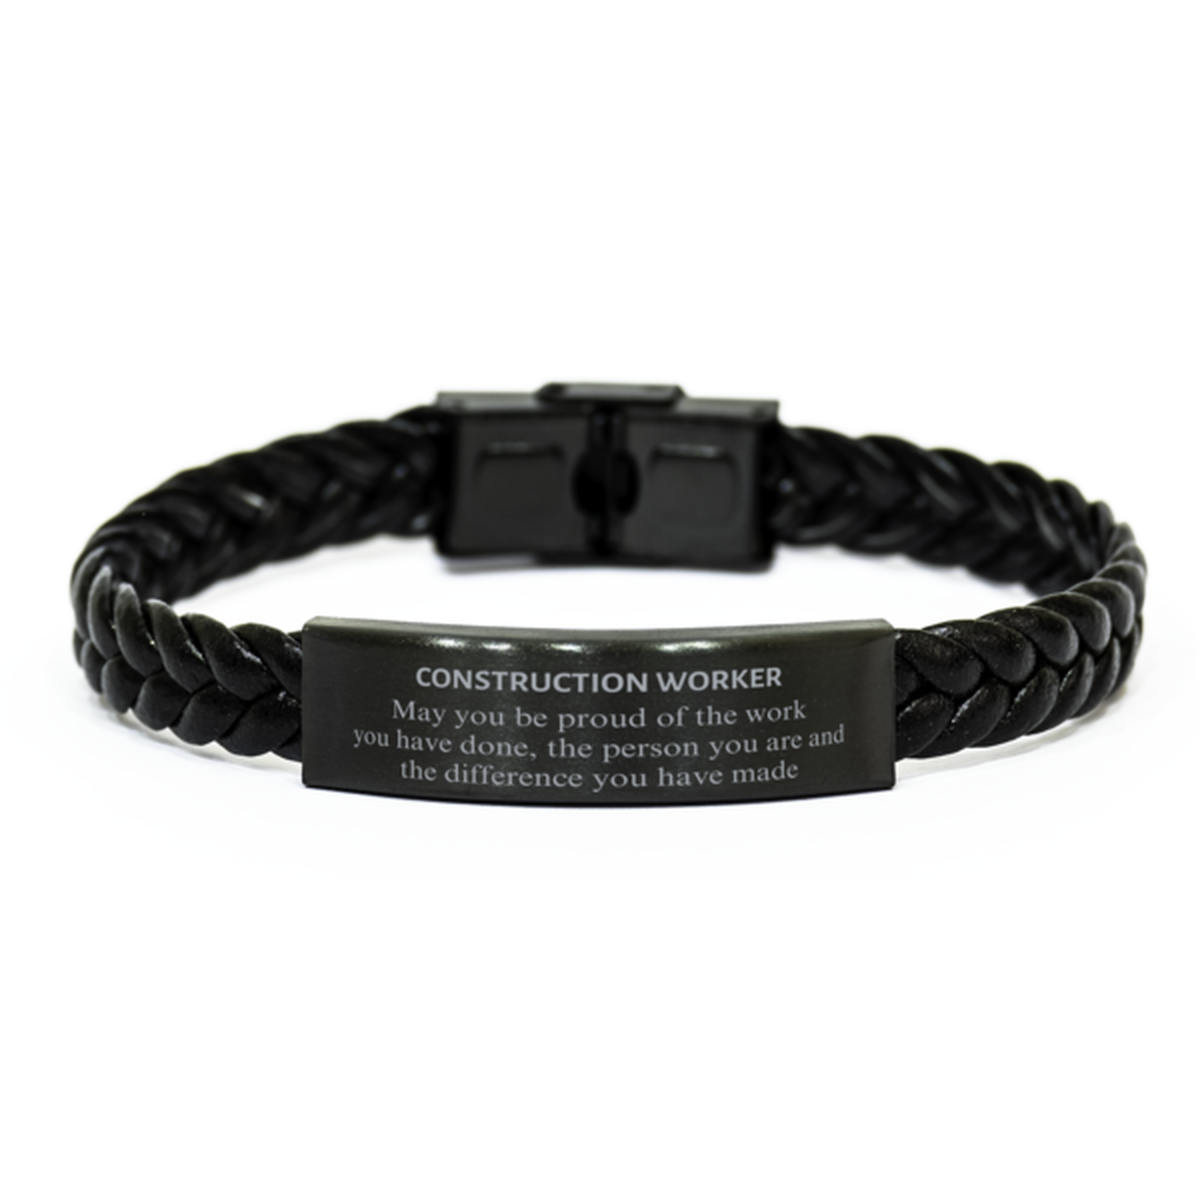 Construction Worker May you be proud of the work you have done, Retirement Construction Worker Braided Leather Bracelet for Colleague Appreciation Gifts Amazing for Construction Worker